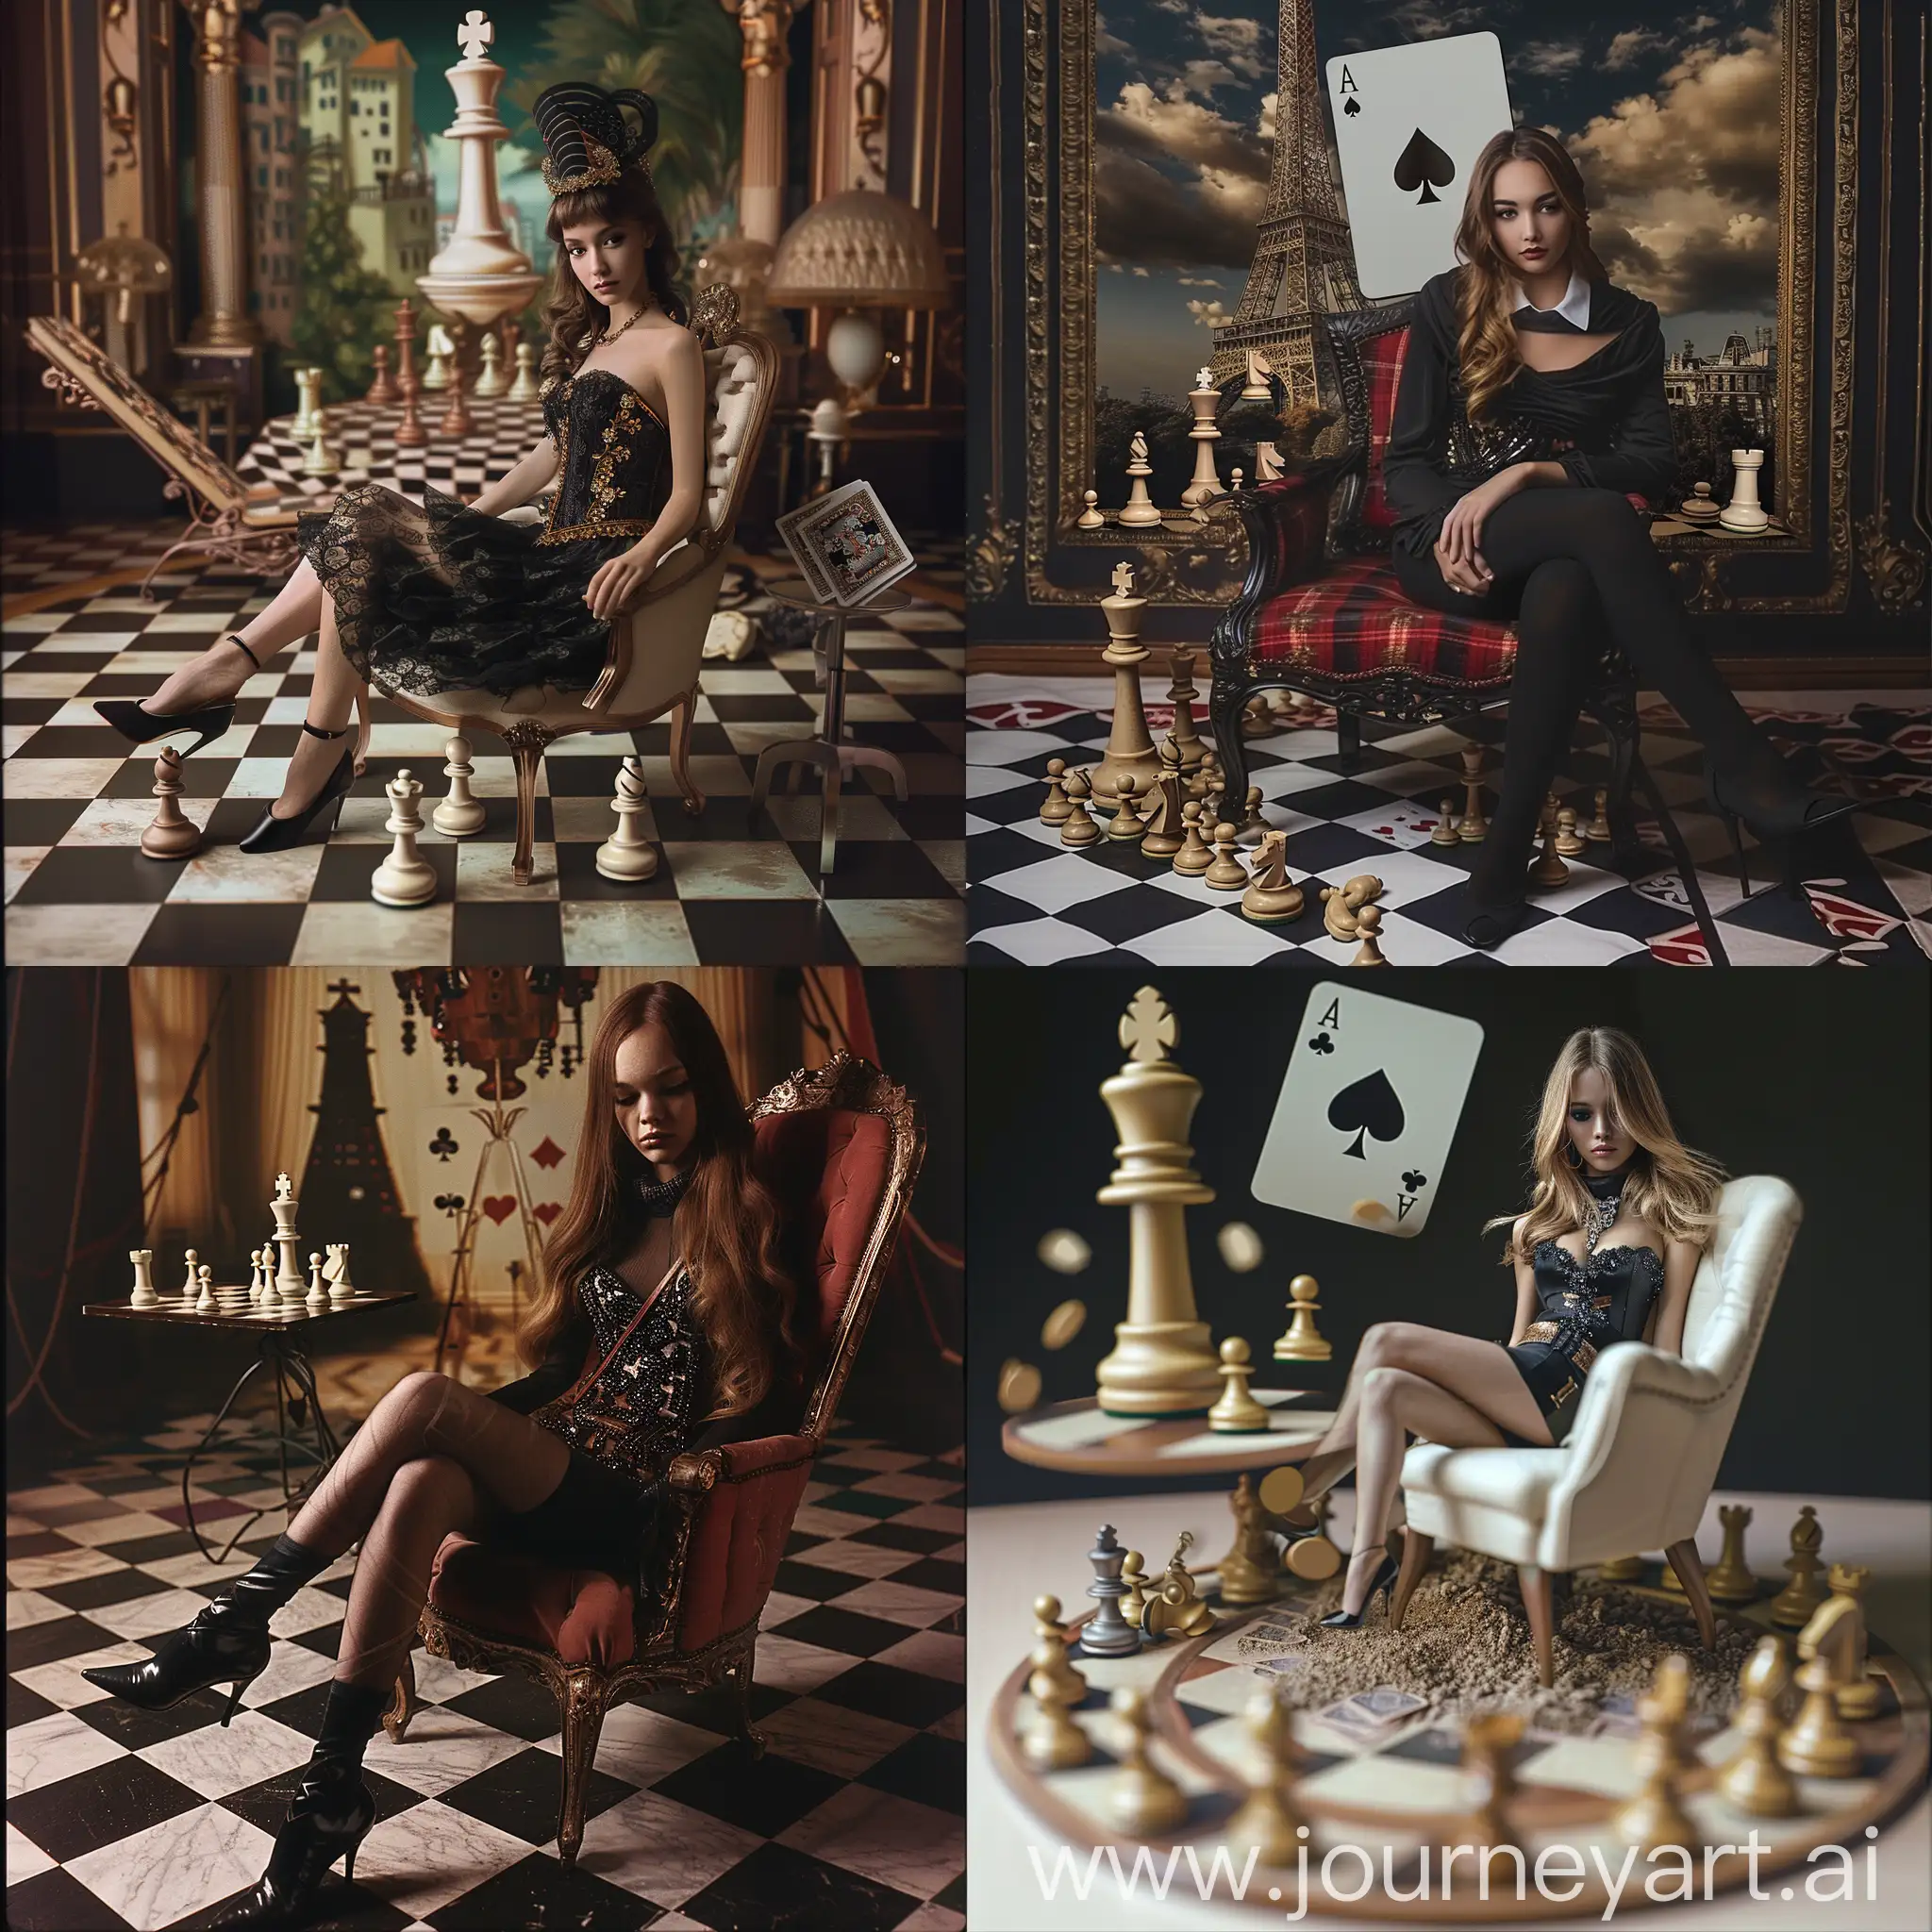 Fashion-Photography-Girl-in-Chair-with-Chess-Path-and-Poker-Card-Background